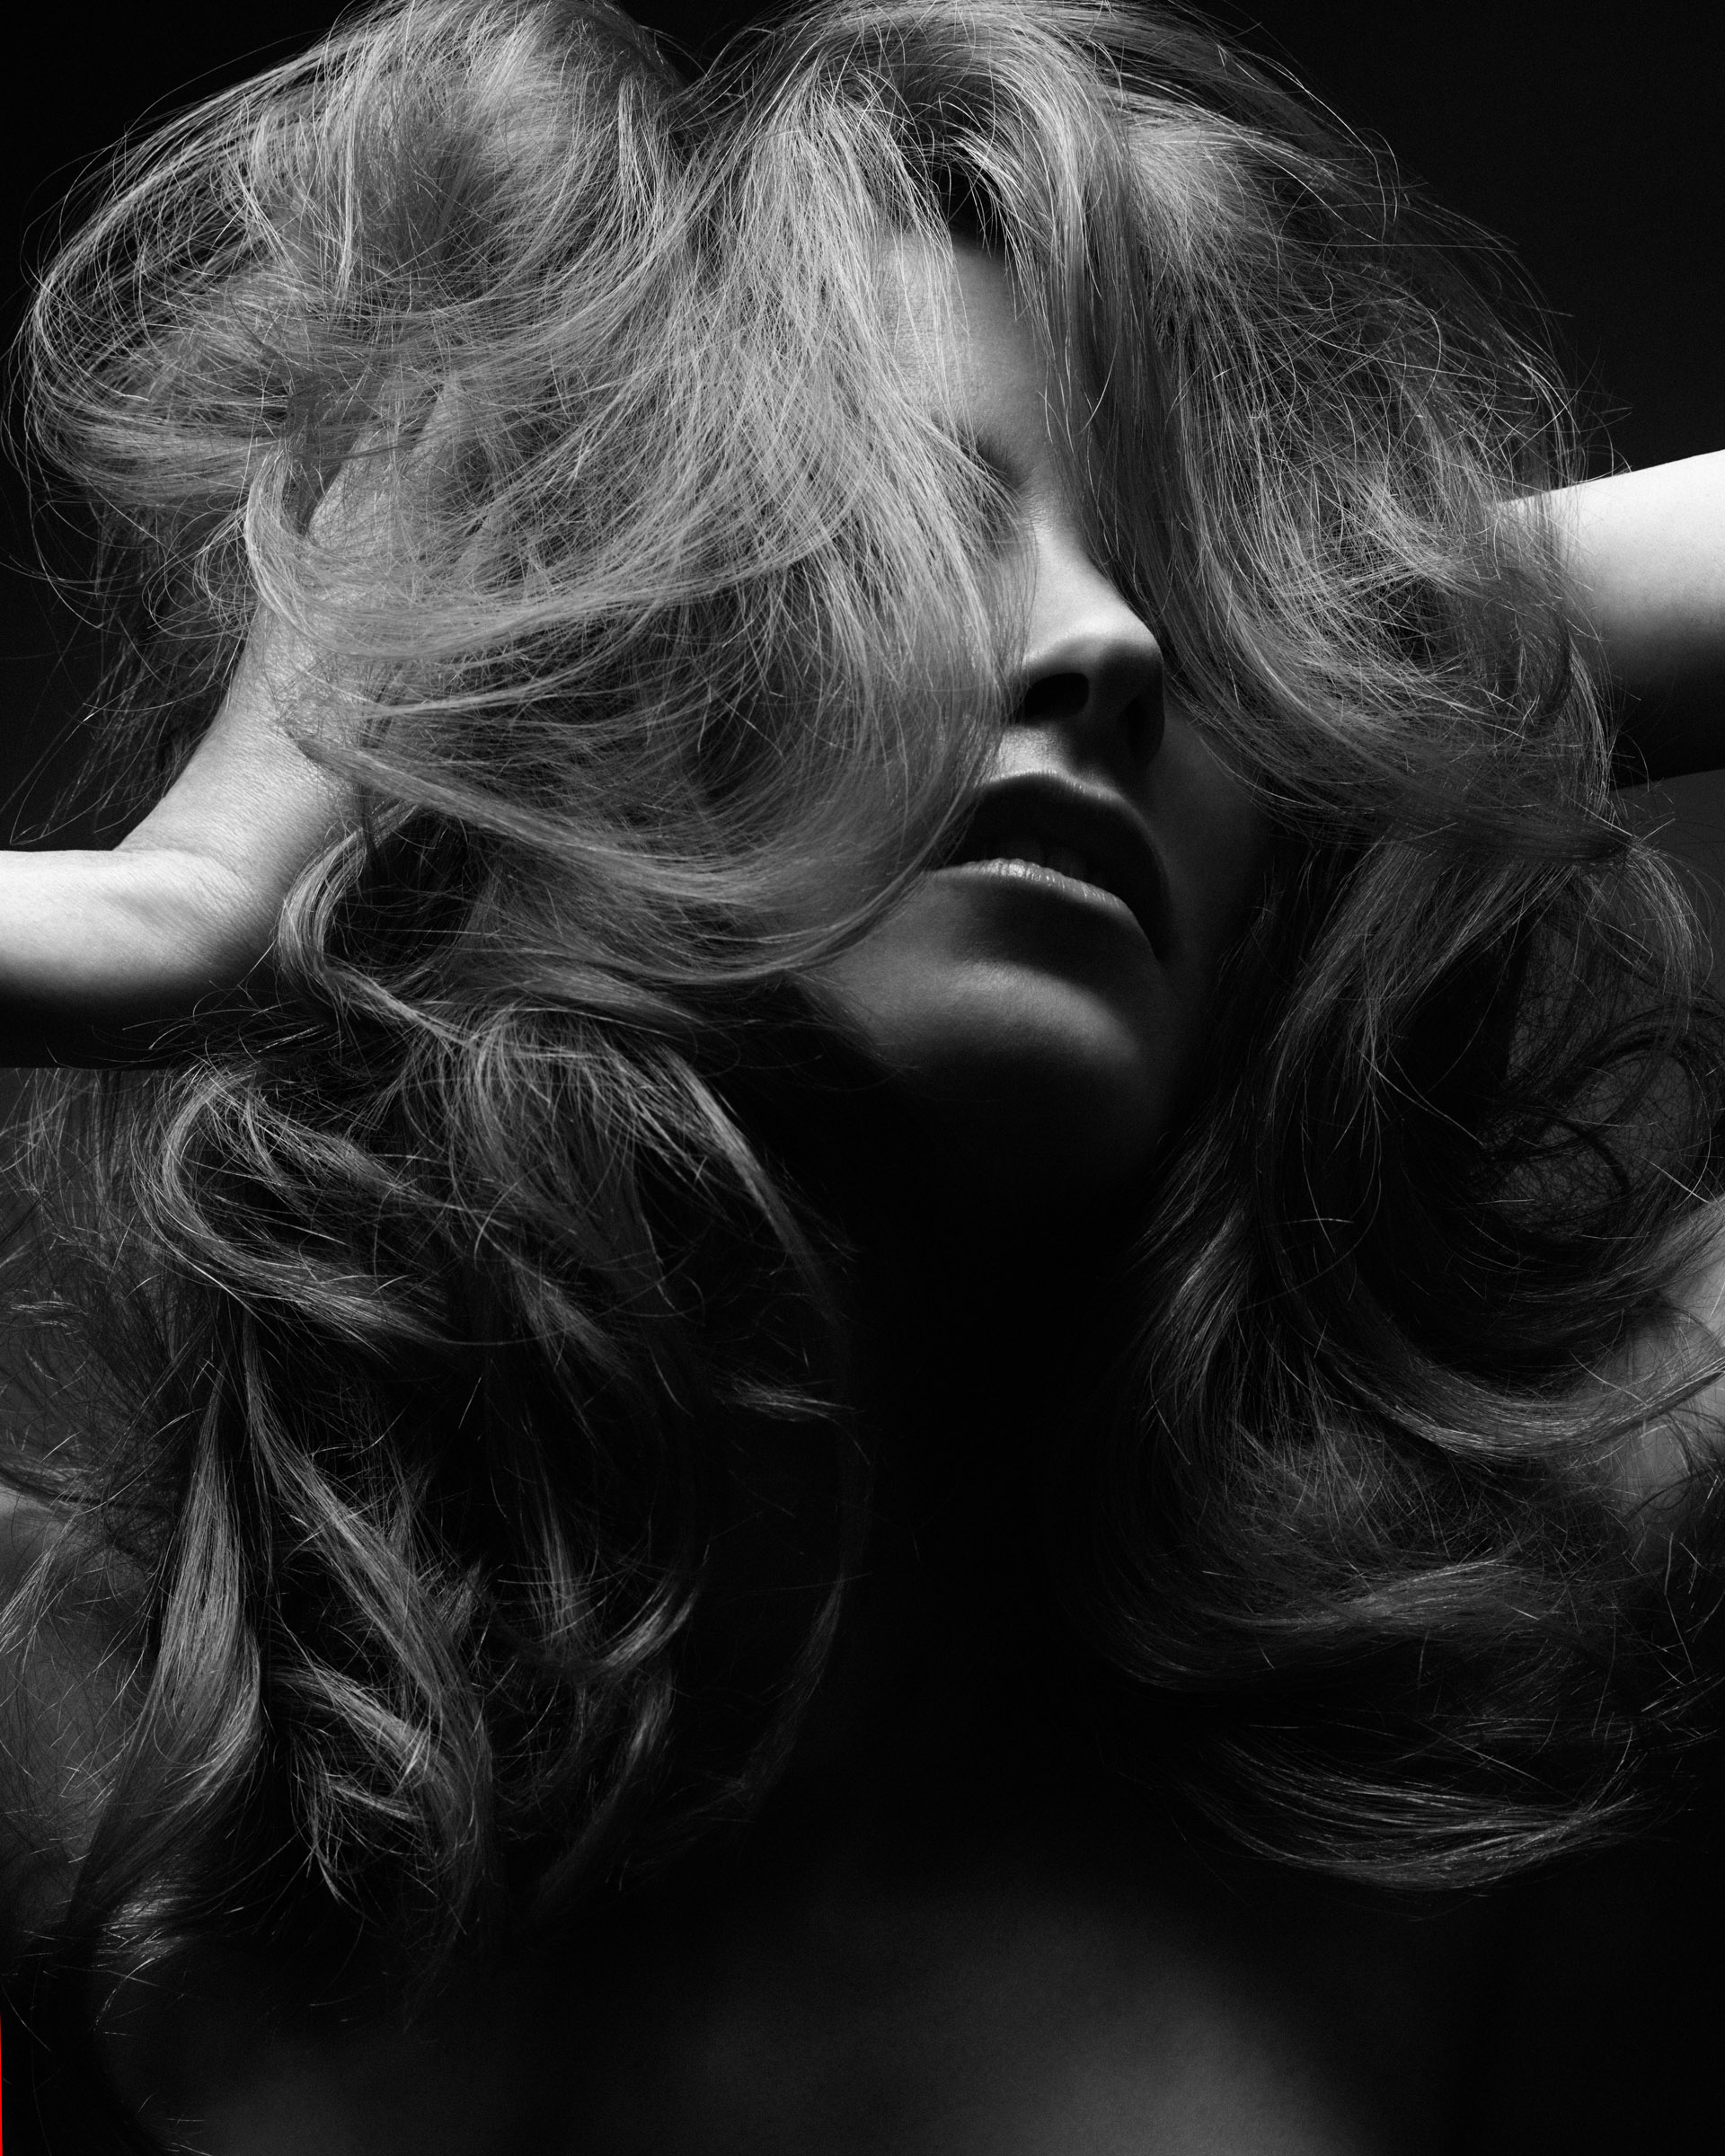 A female model with voluminous curly long hair in a studio